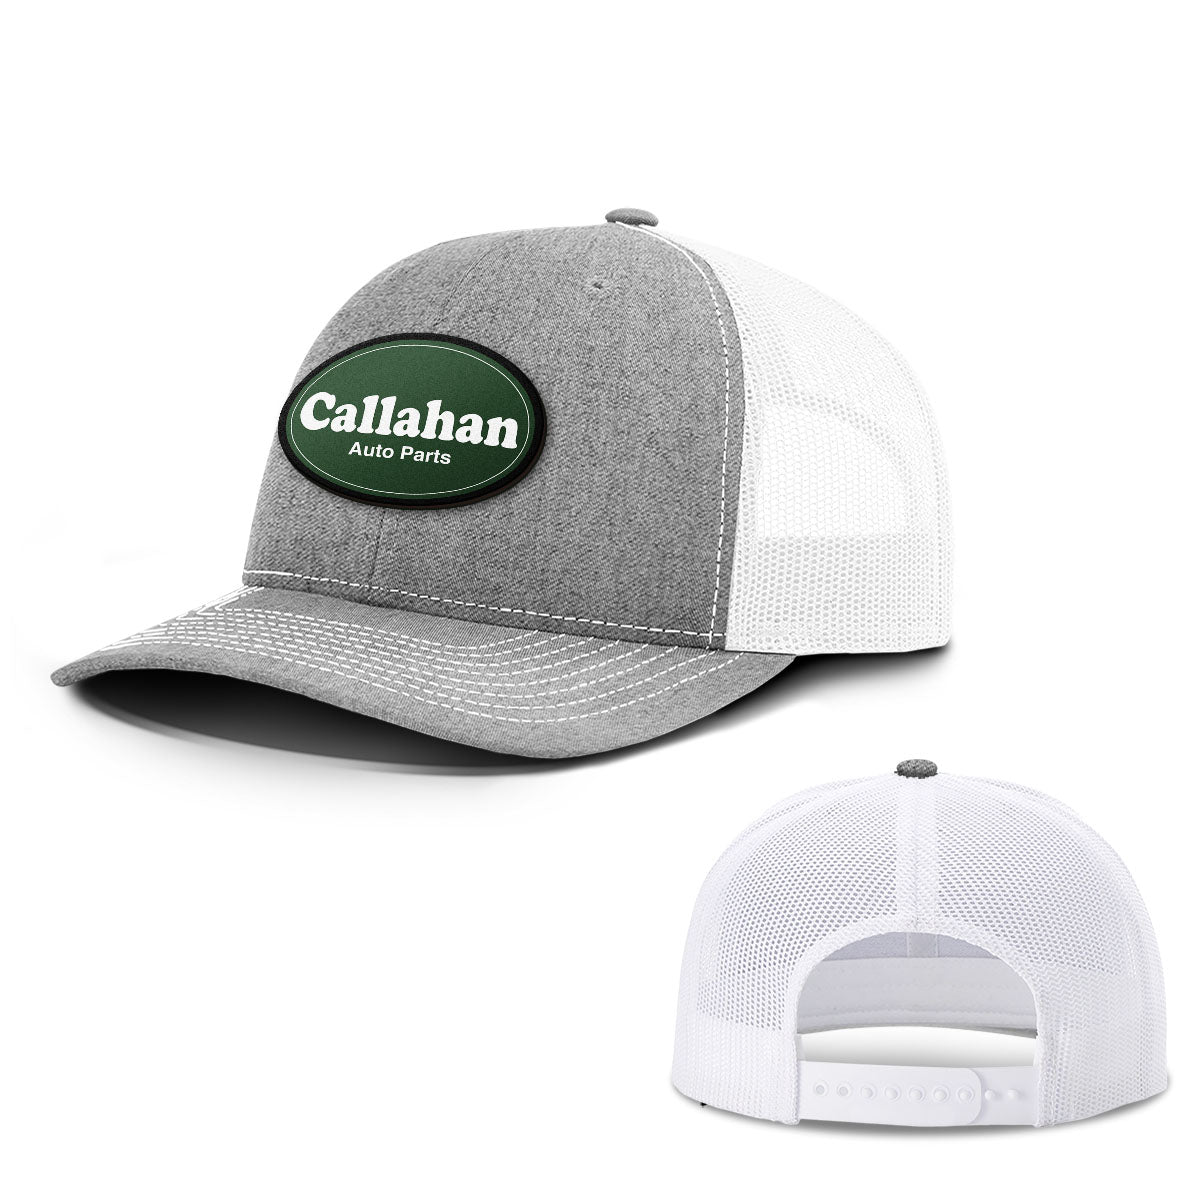 Callahan Auto Parts Patch Hats - BustedTees.com